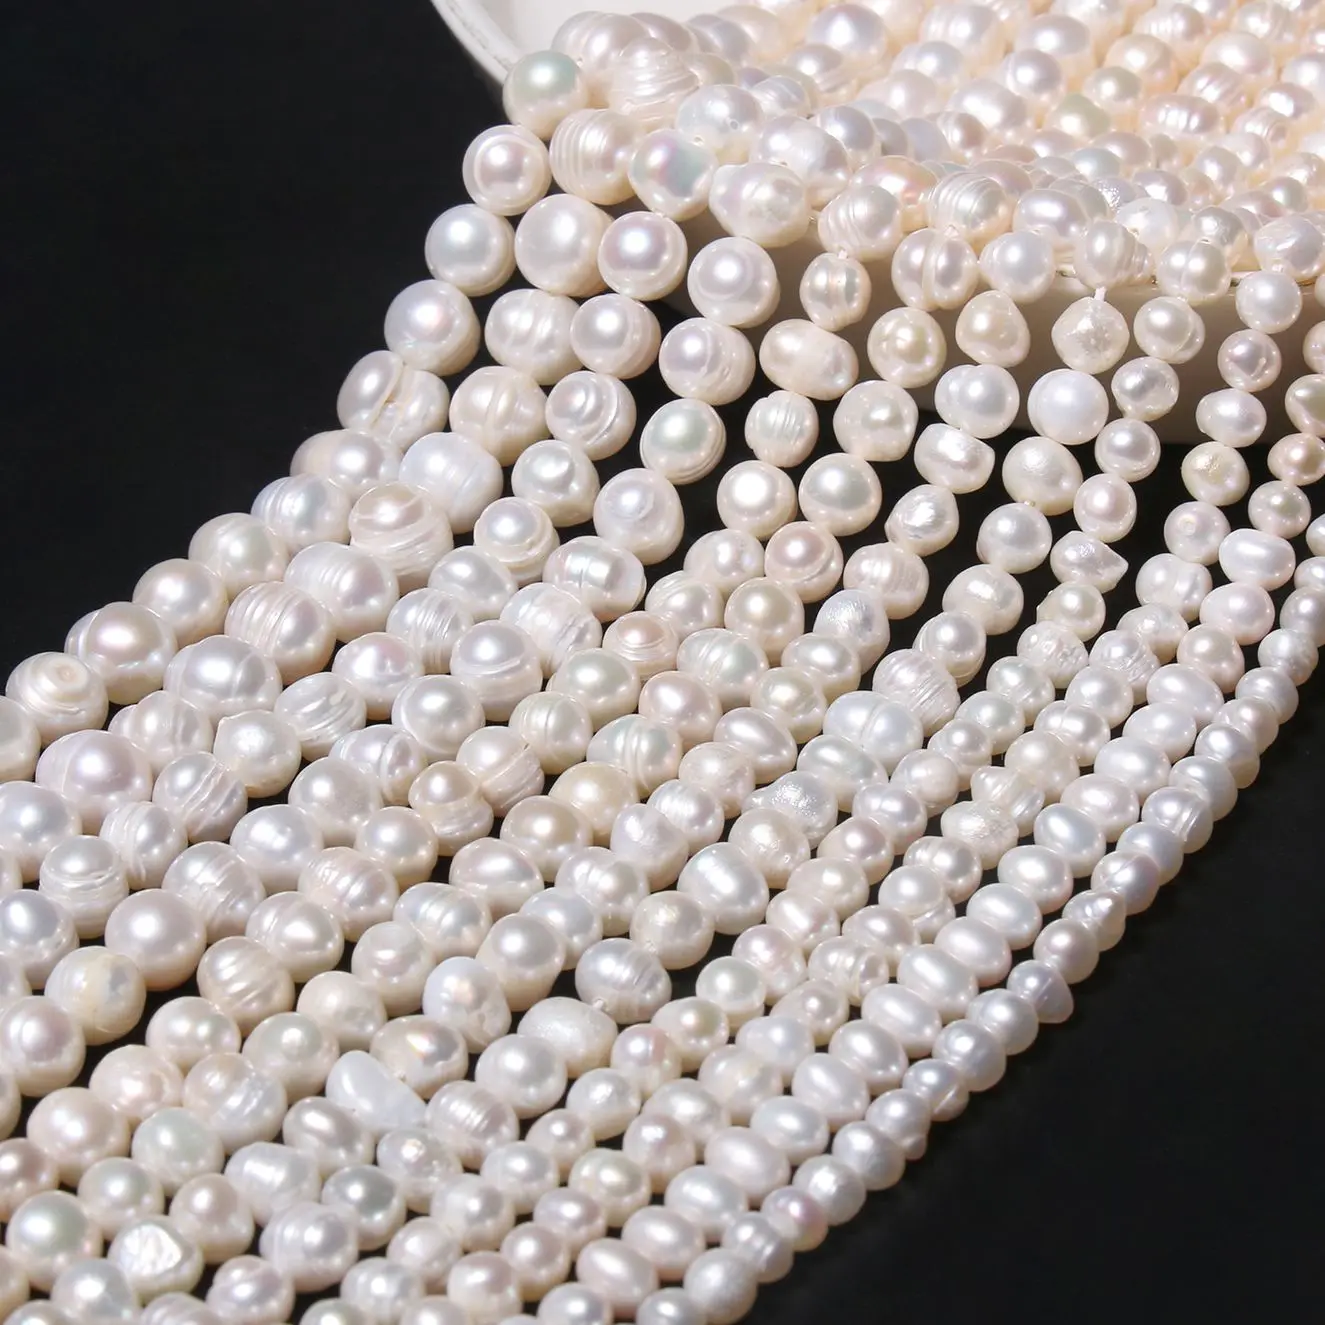 

AA Natural Freshwater Pearls White Oval Punch Shape Loose Beads For Jewelry Making DIY Bracelet Necklace 3-7mmmm 15'' Strand